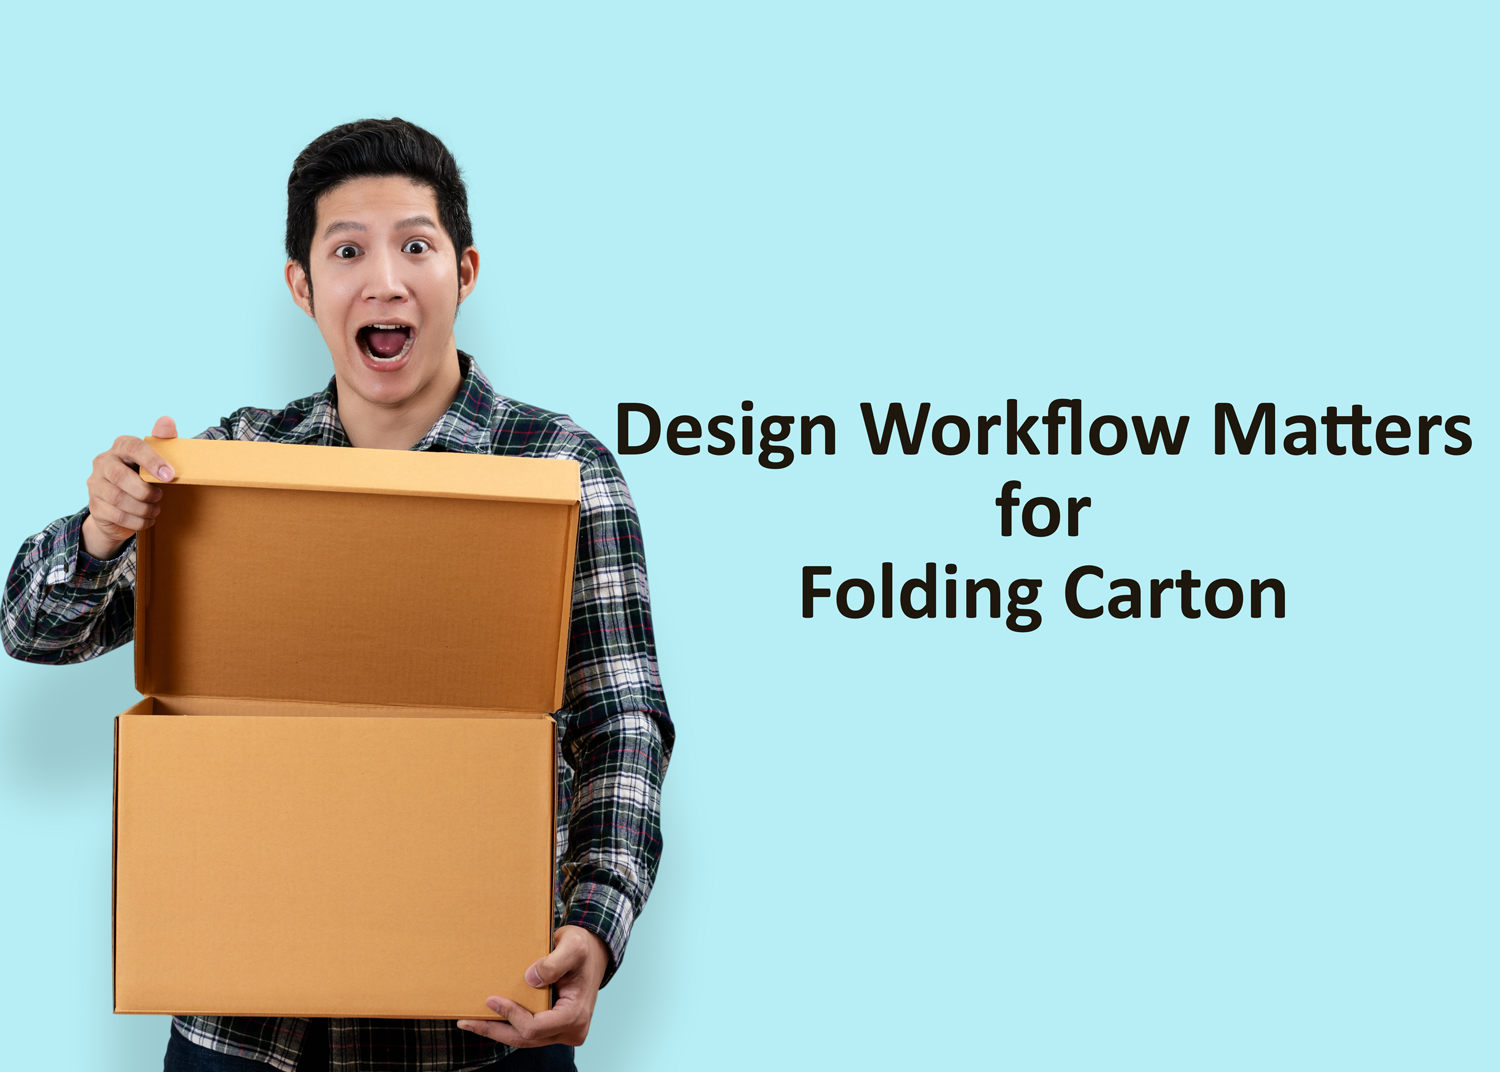 Featured image for “Design Workflow Matters for Folding Carton”